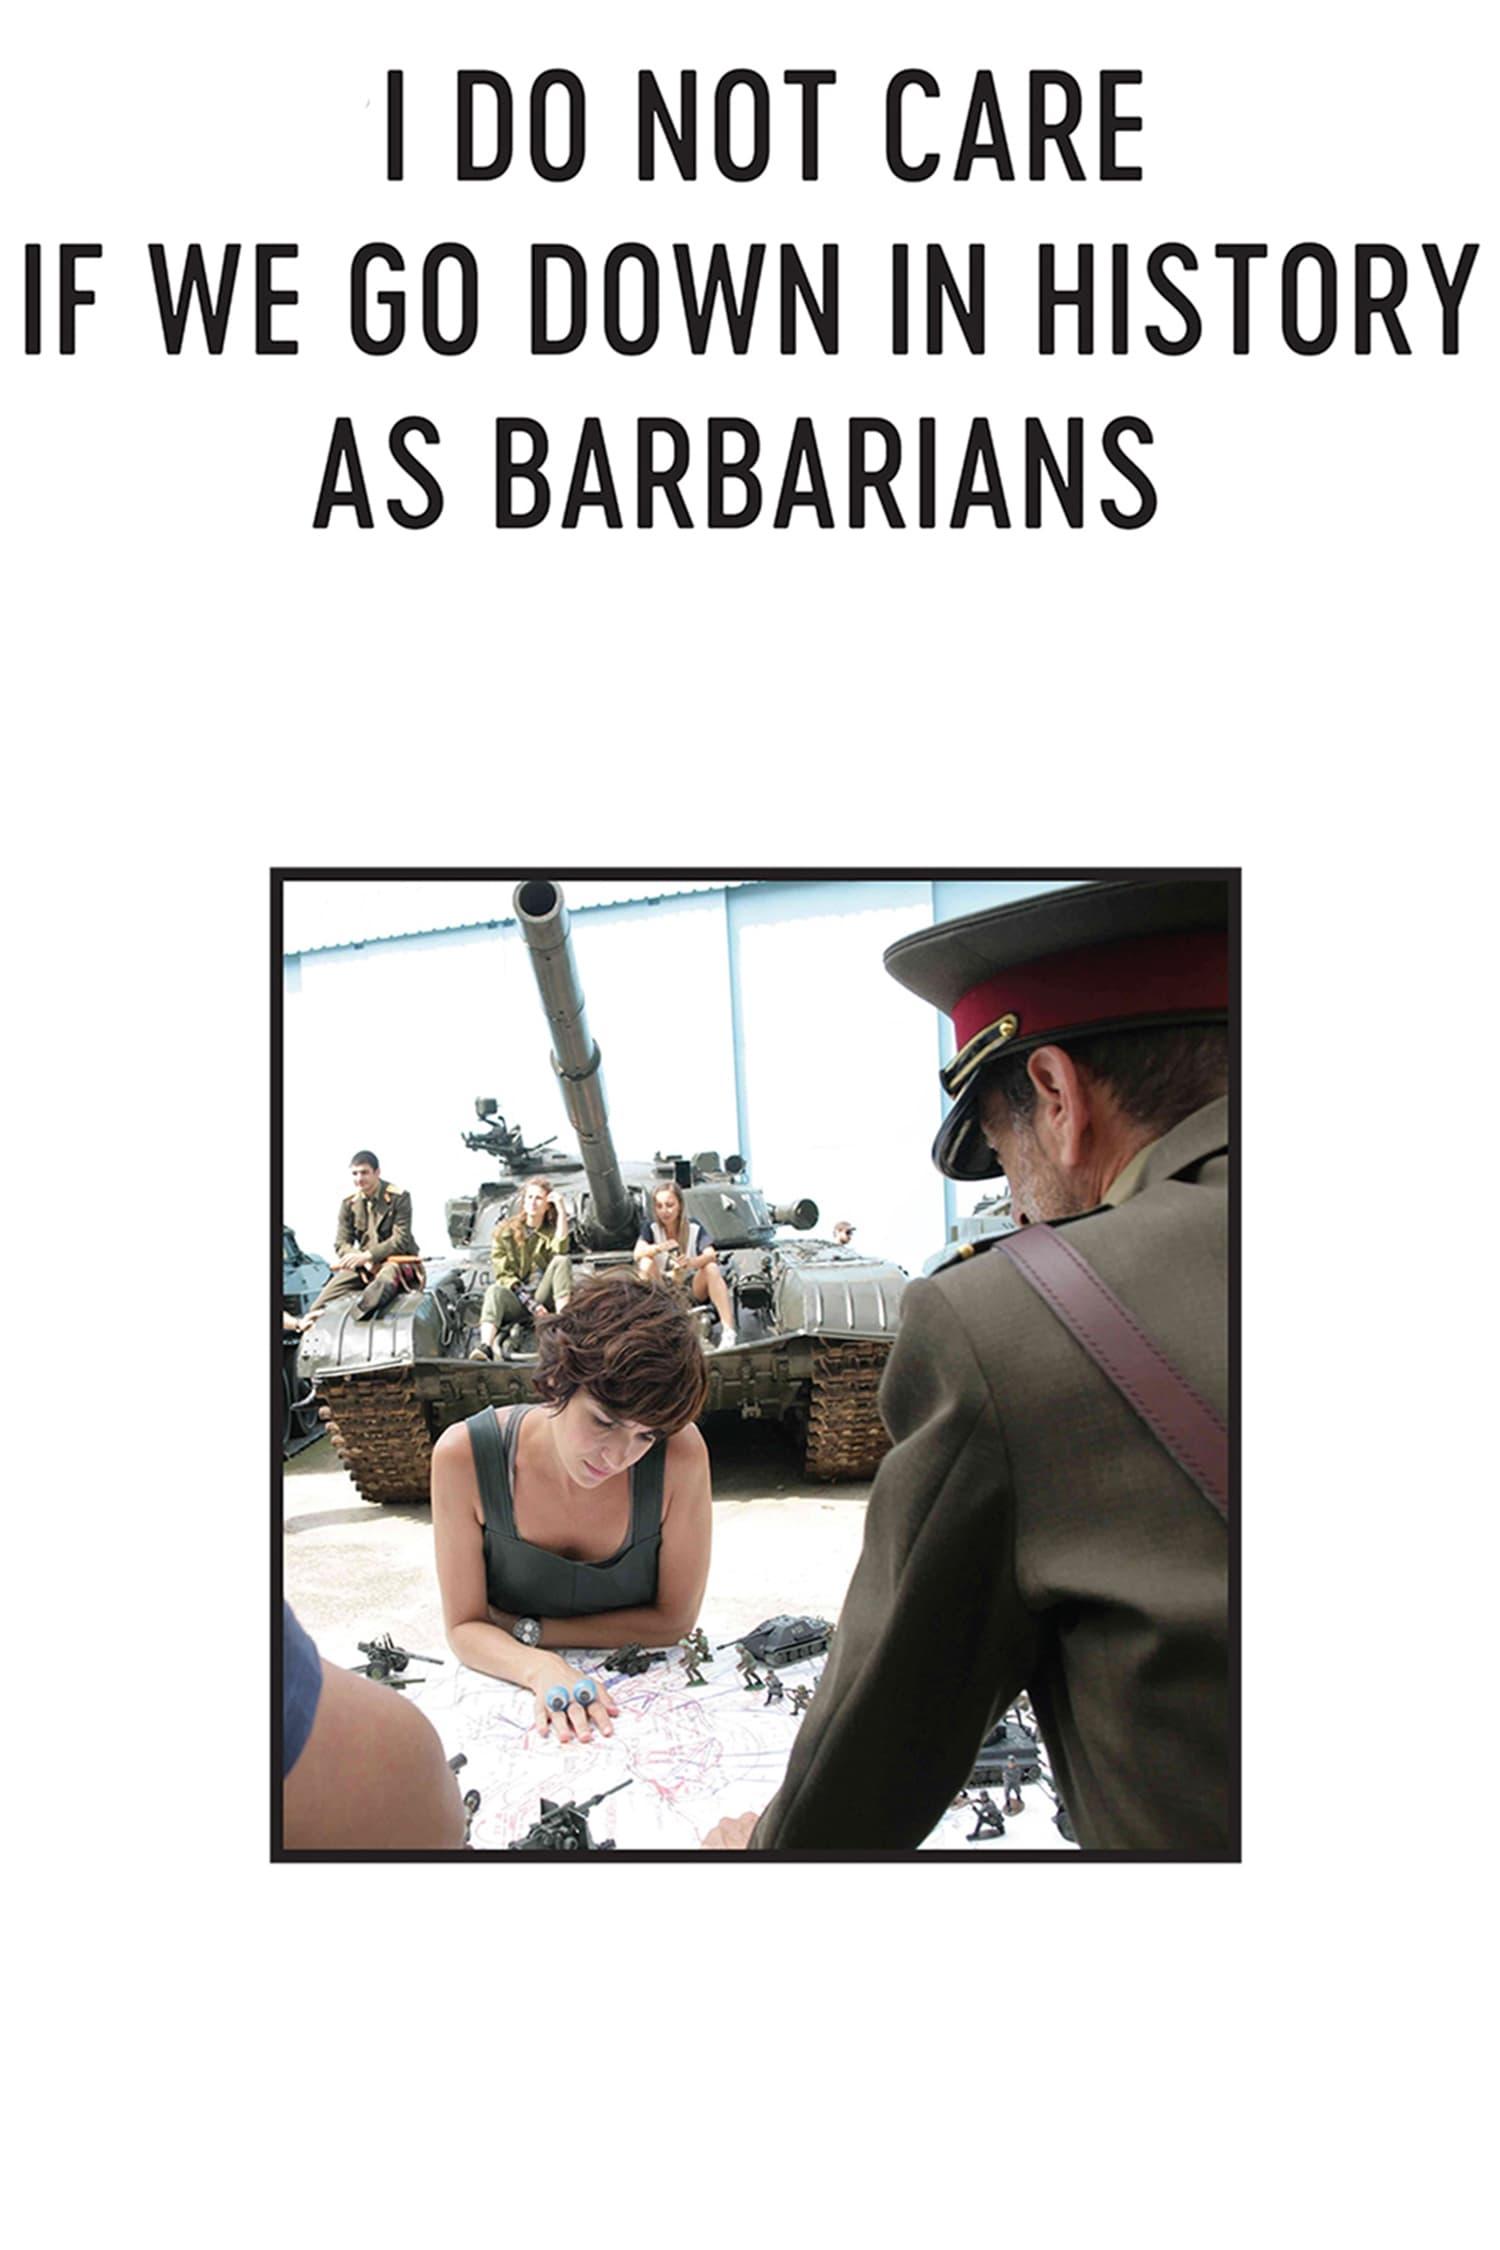 I Do Not Care If We Go Down in History as Barbarians poster